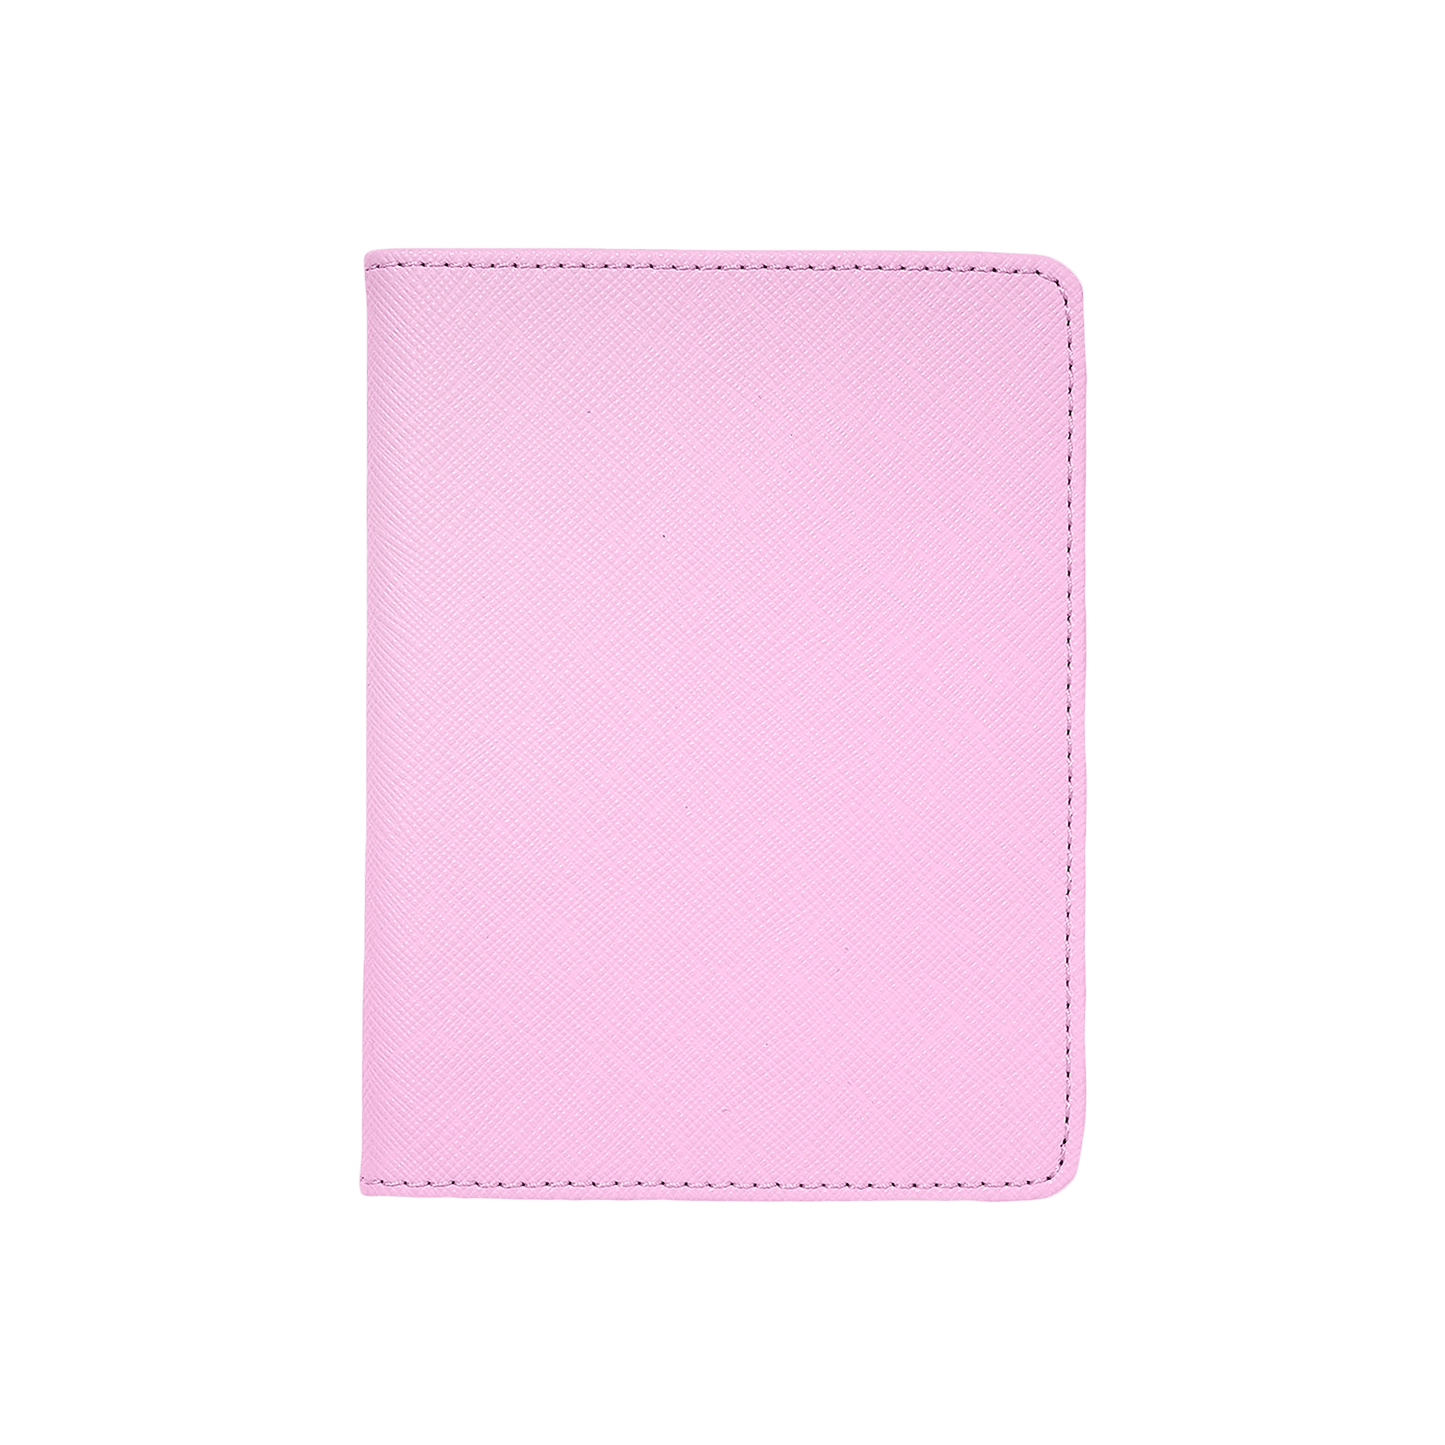 Pink With Flowers Passport ID Card Holder Passport ID Card -  Canada